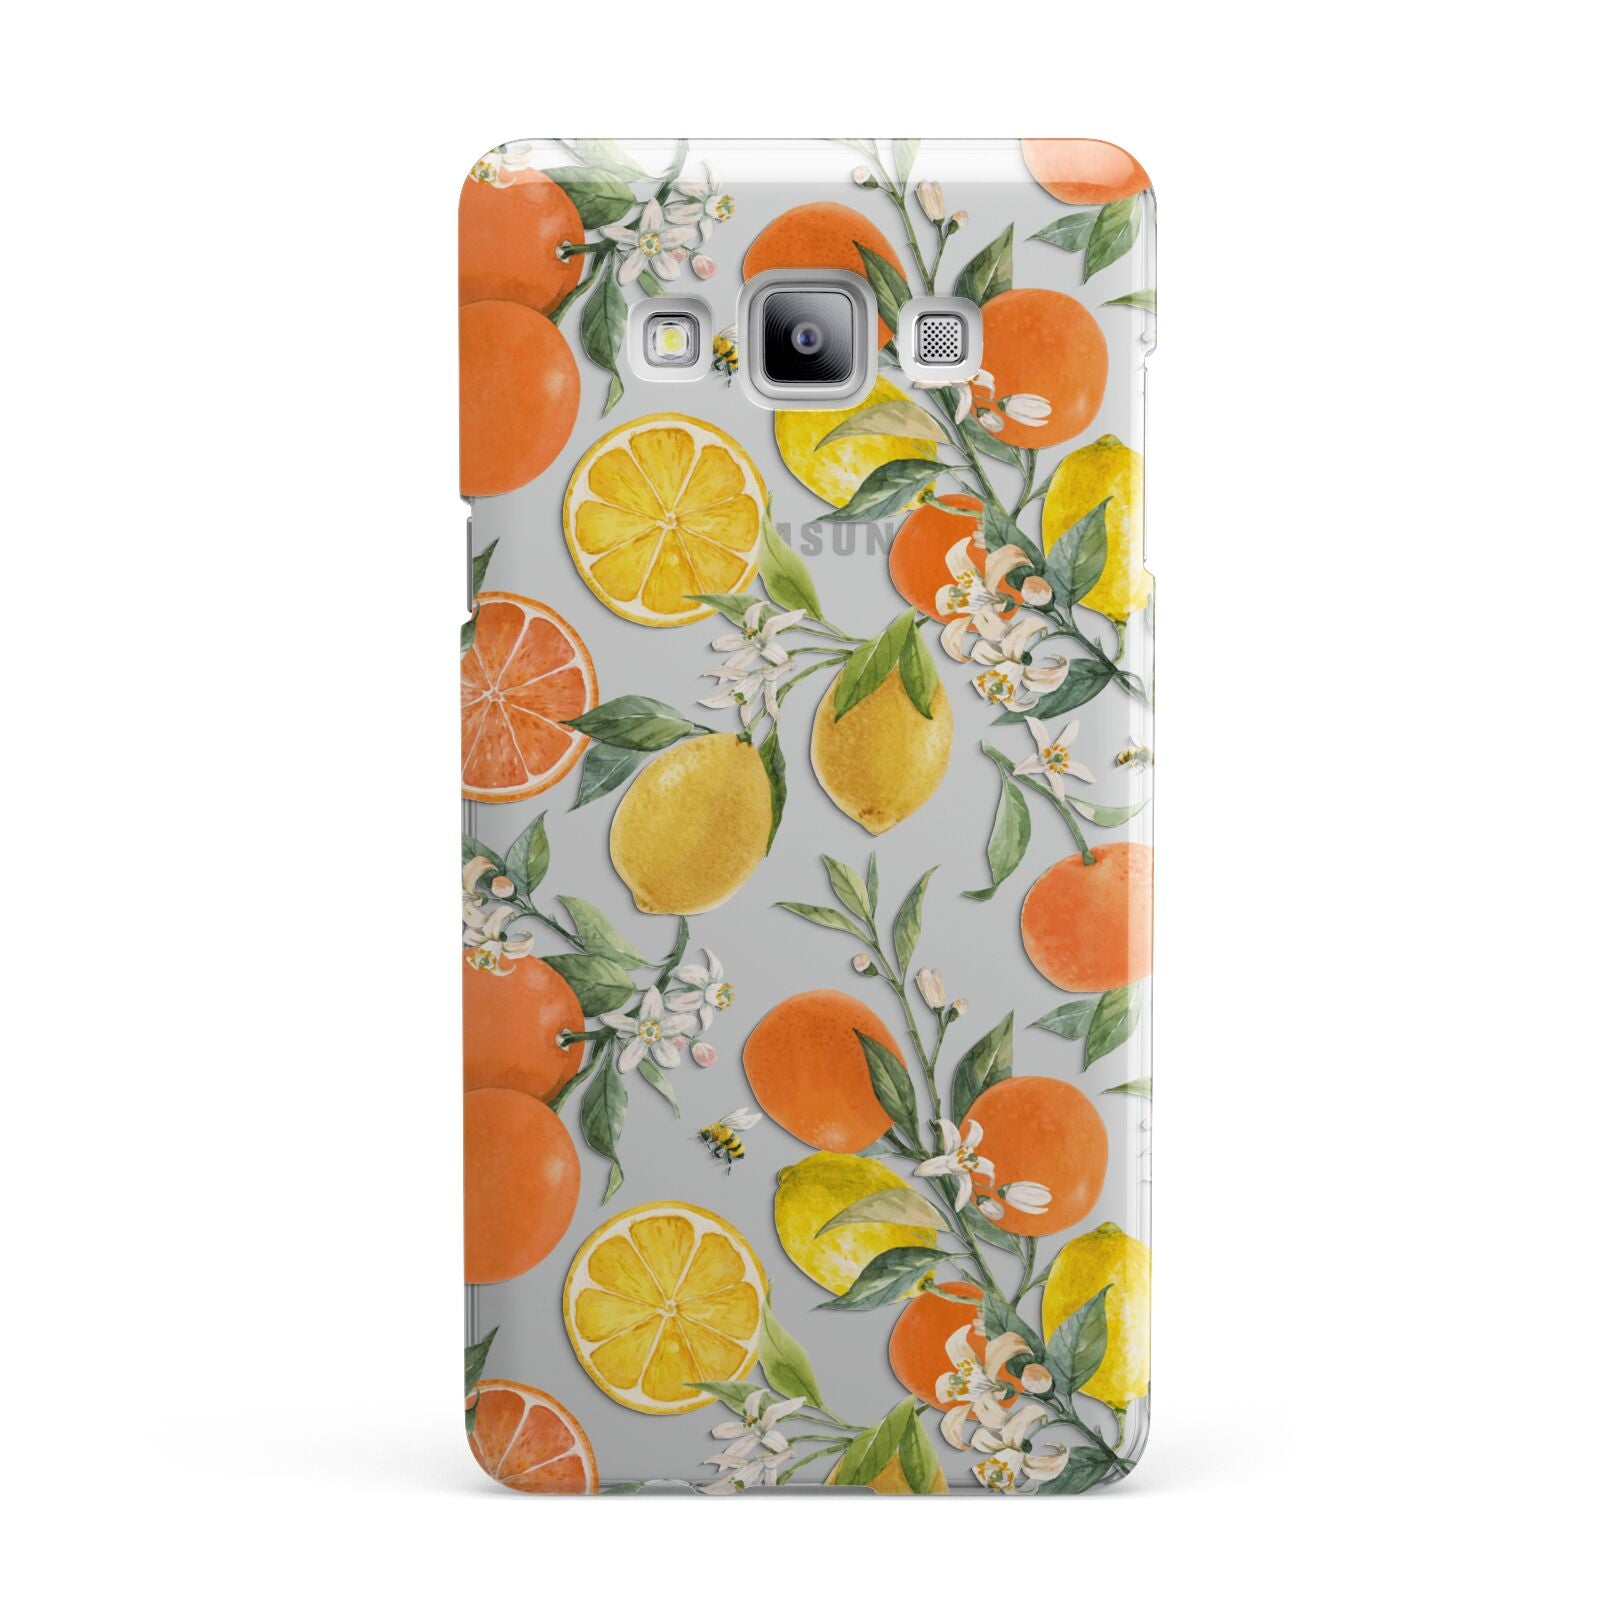 Lemons and Oranges Samsung Galaxy A7 2015 Case